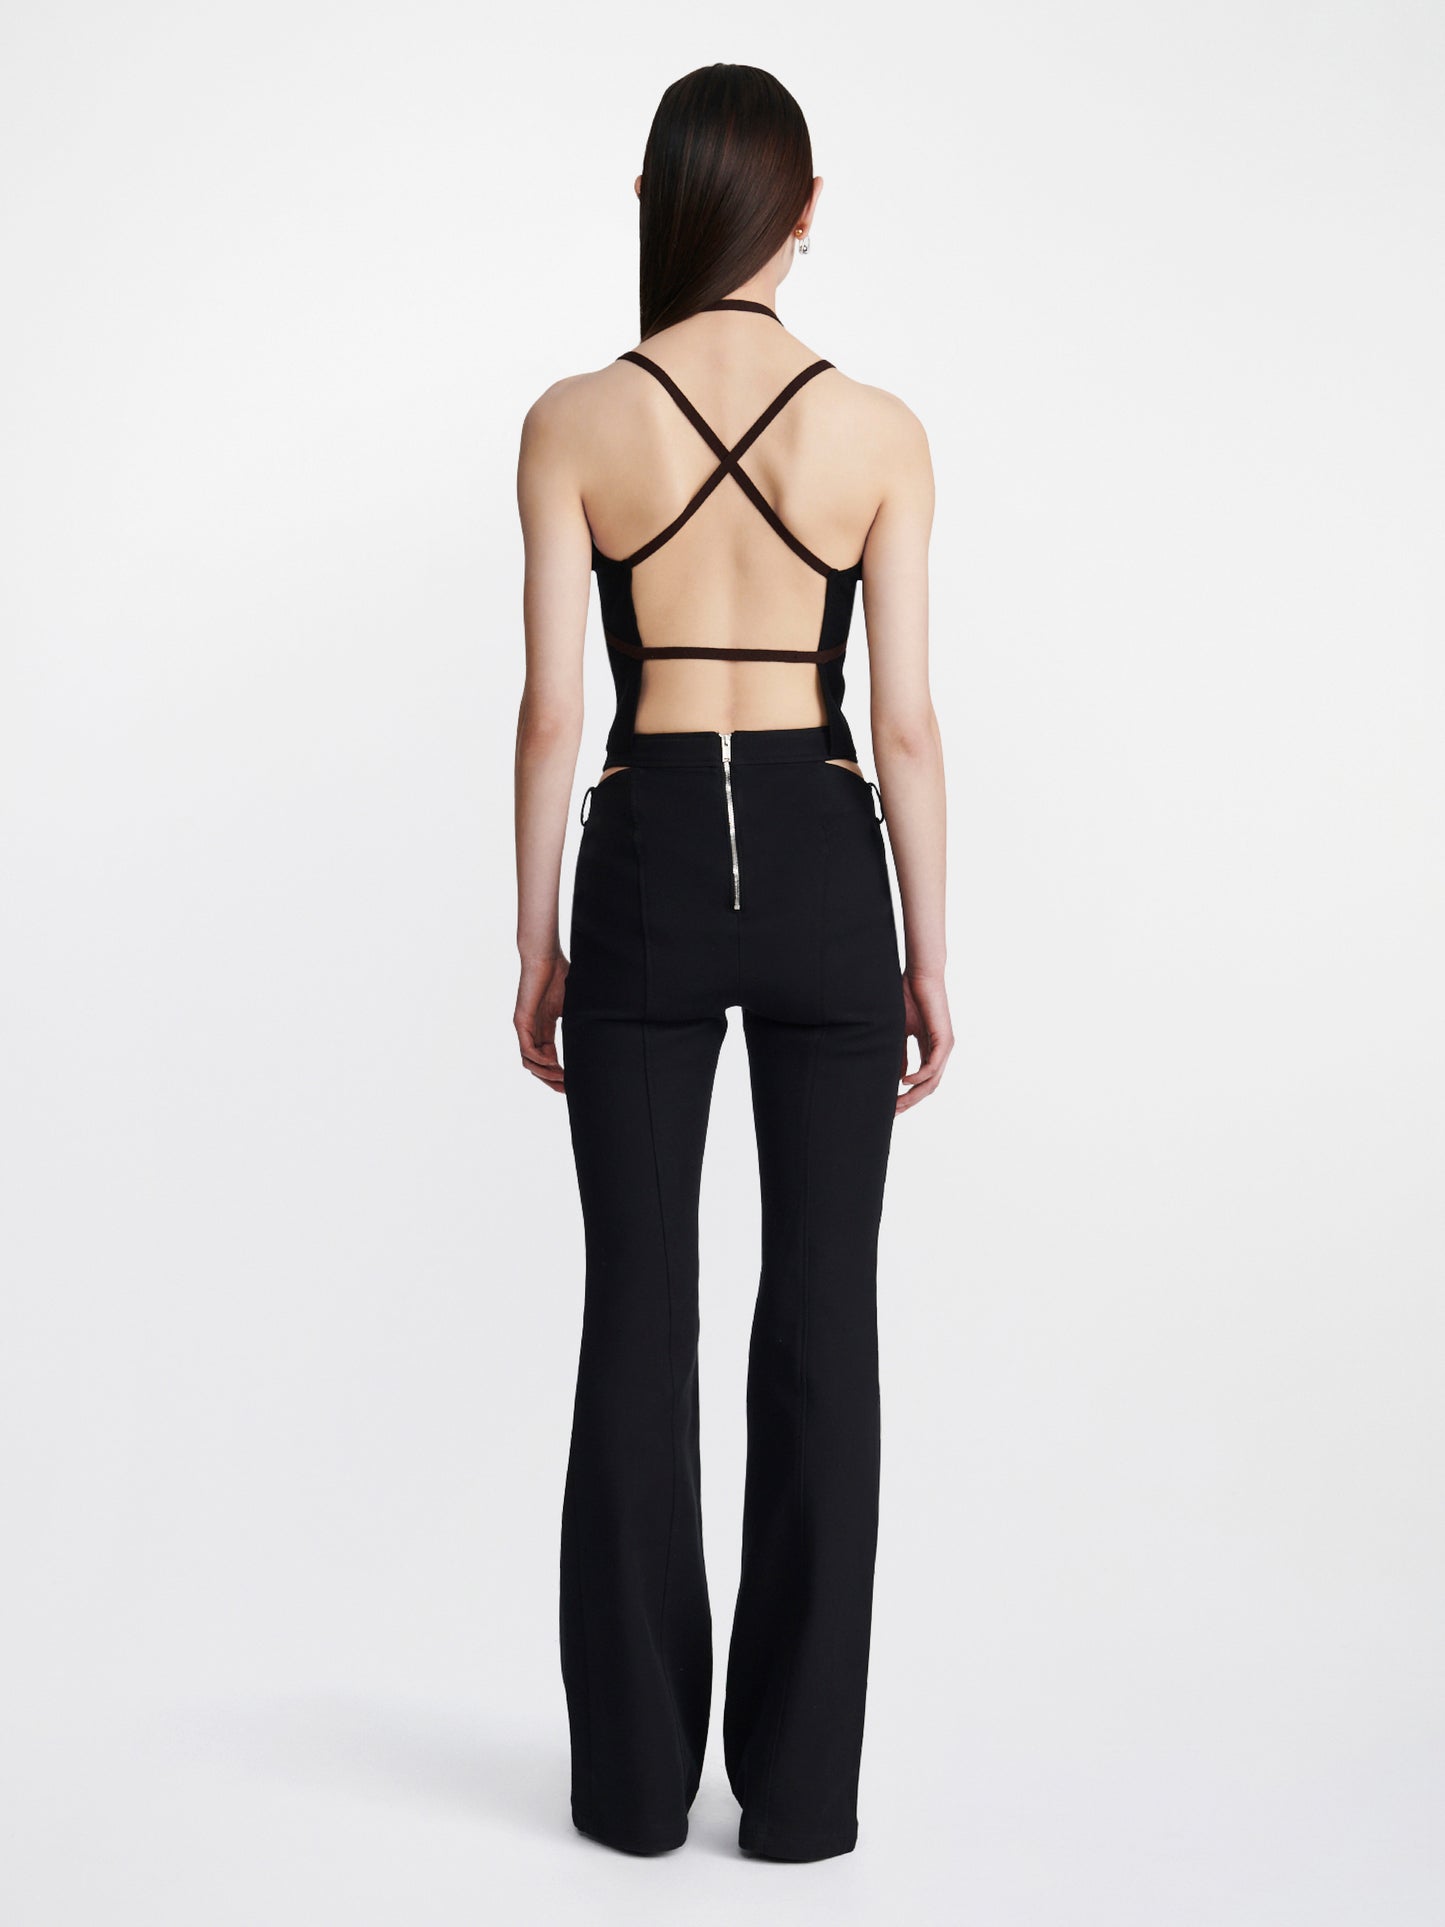 SUSPENDED HARNESS TOP